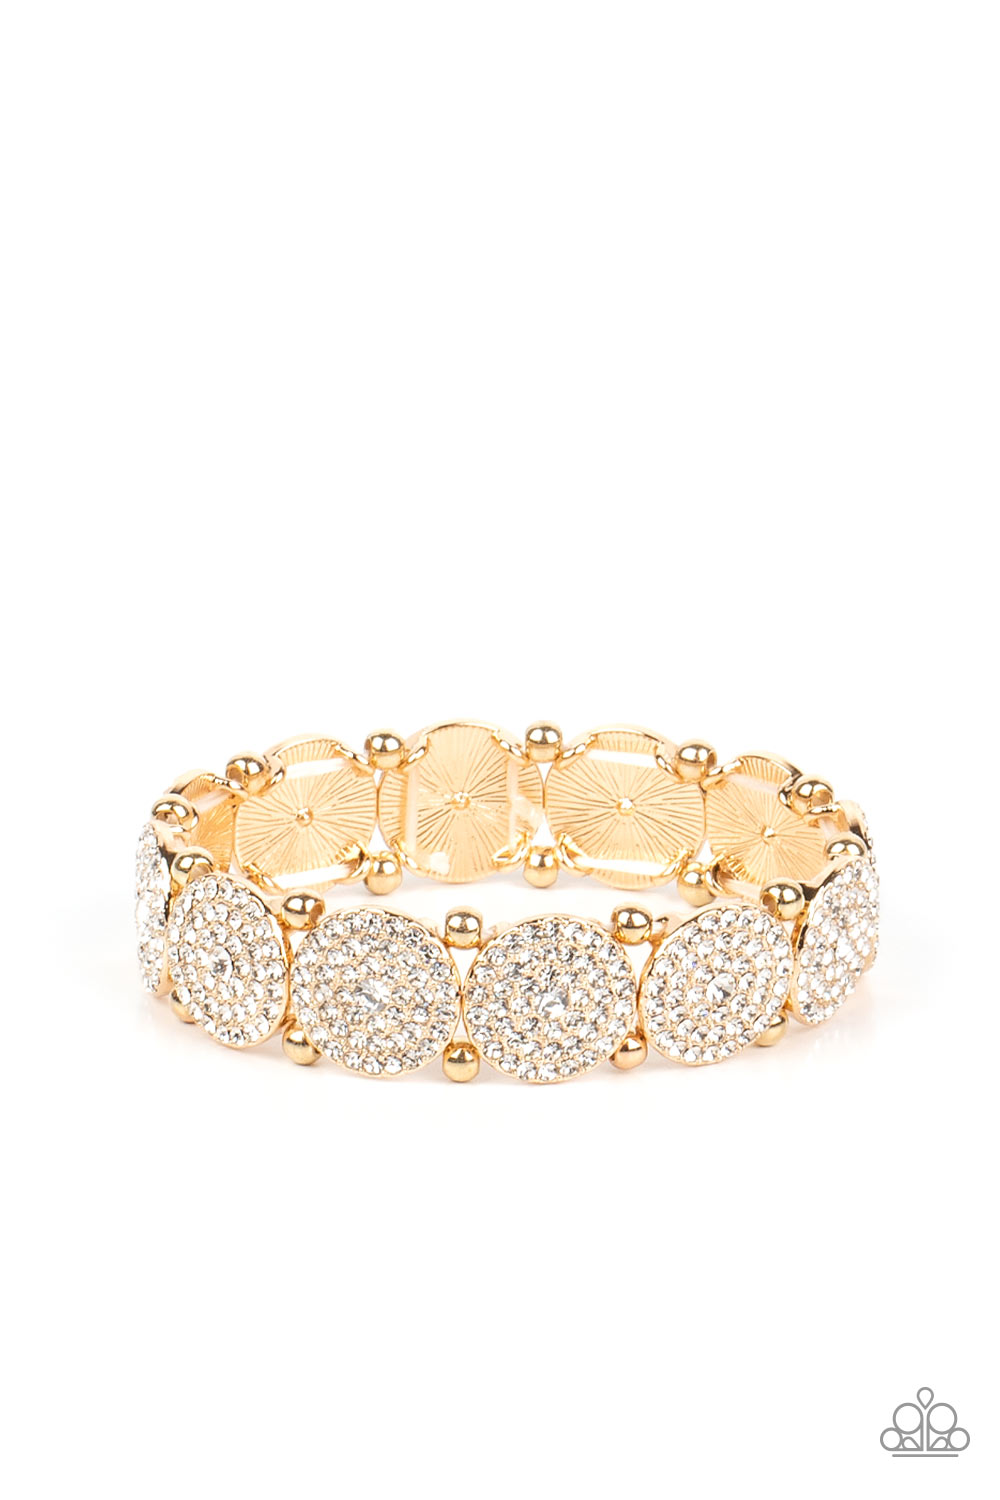 Palace Intrigue - Gold Stretchy Fashion Bracelet - Paparazzi Accessories - Icy white rhinestone encrusted gold frames glitter along stretchy bands around the wrist for a timeless twinkle fashion bracelet.